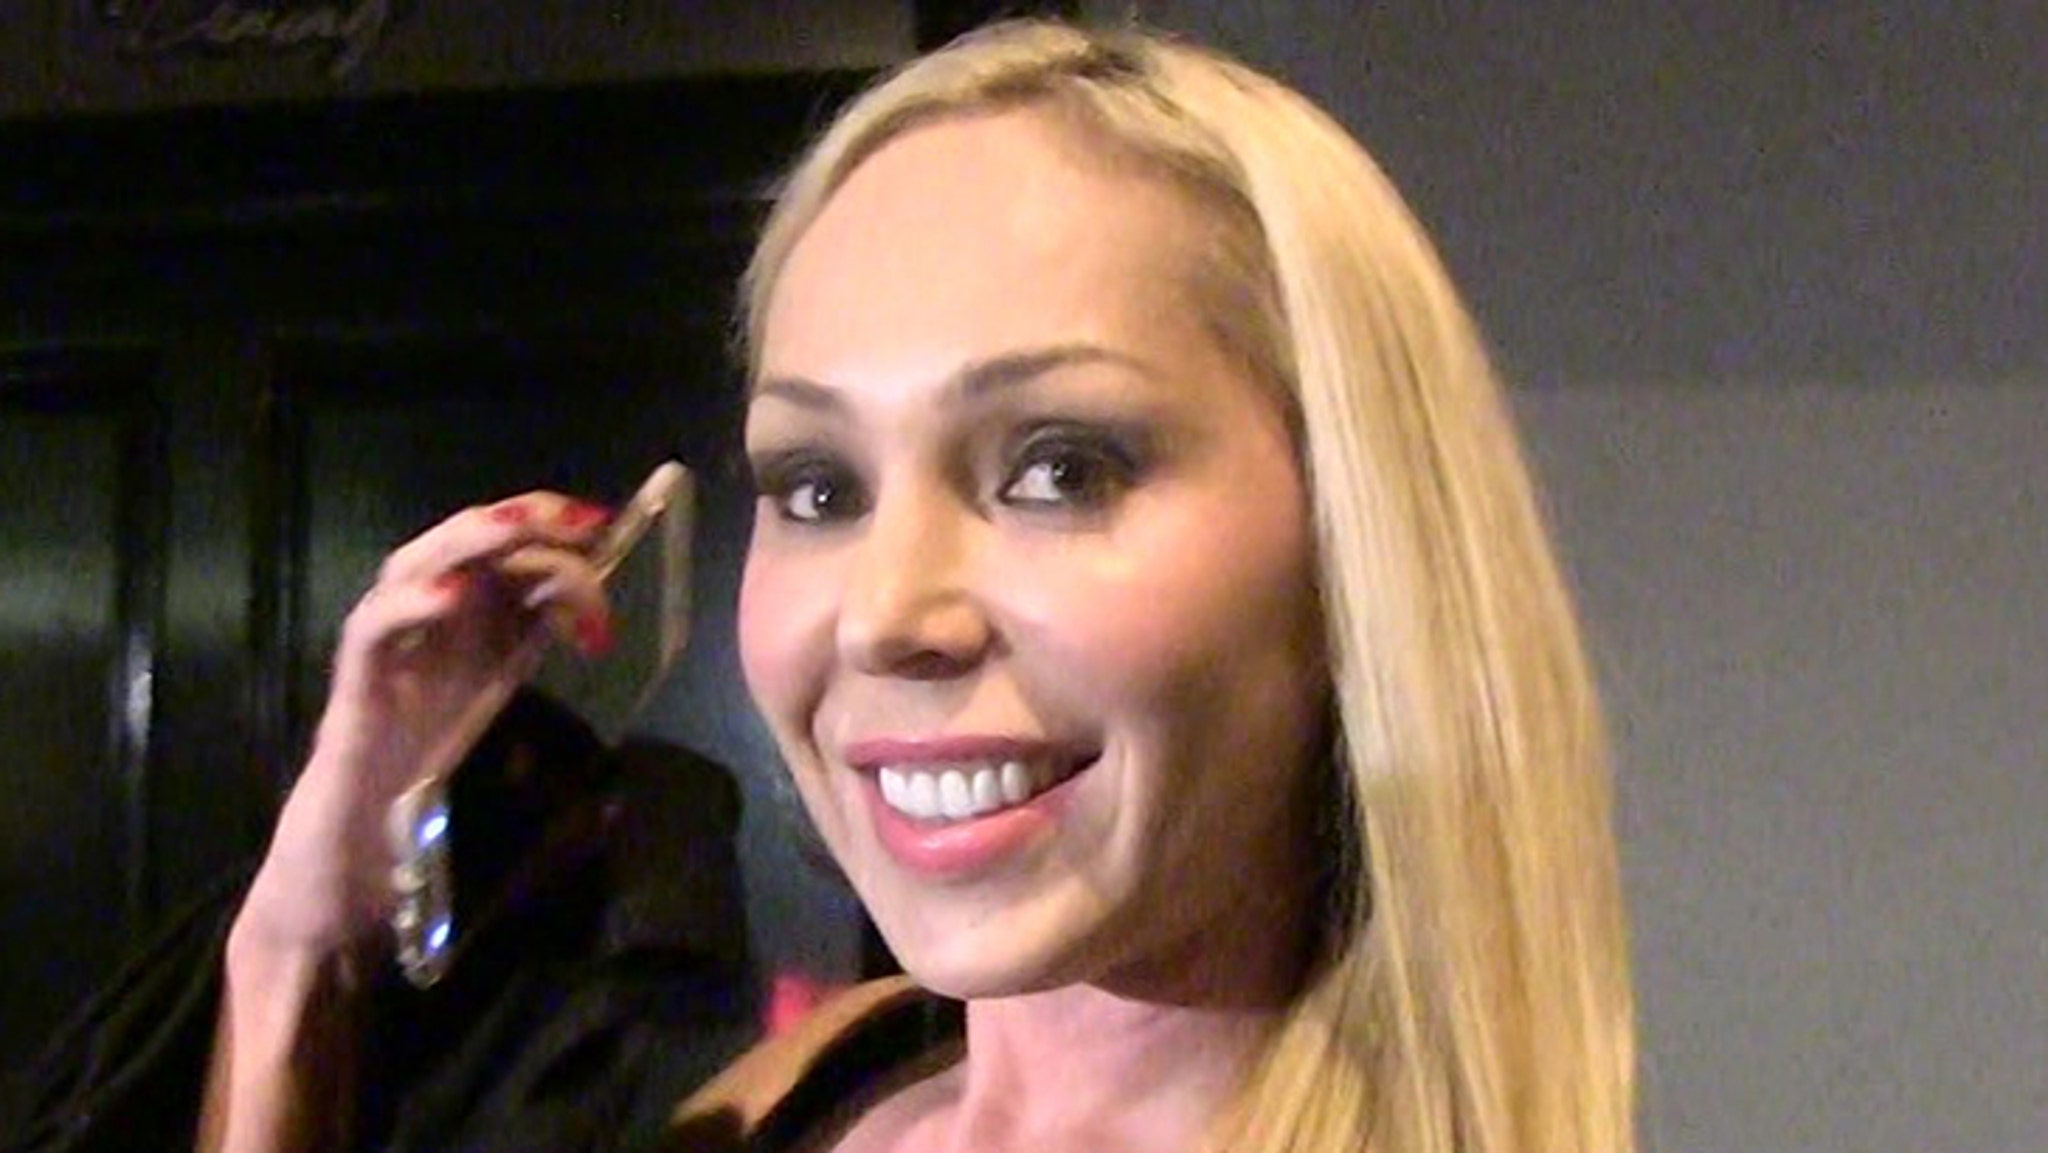 Porn Star Mary Carey Excited To Remarry But Needs Divorce Approved First